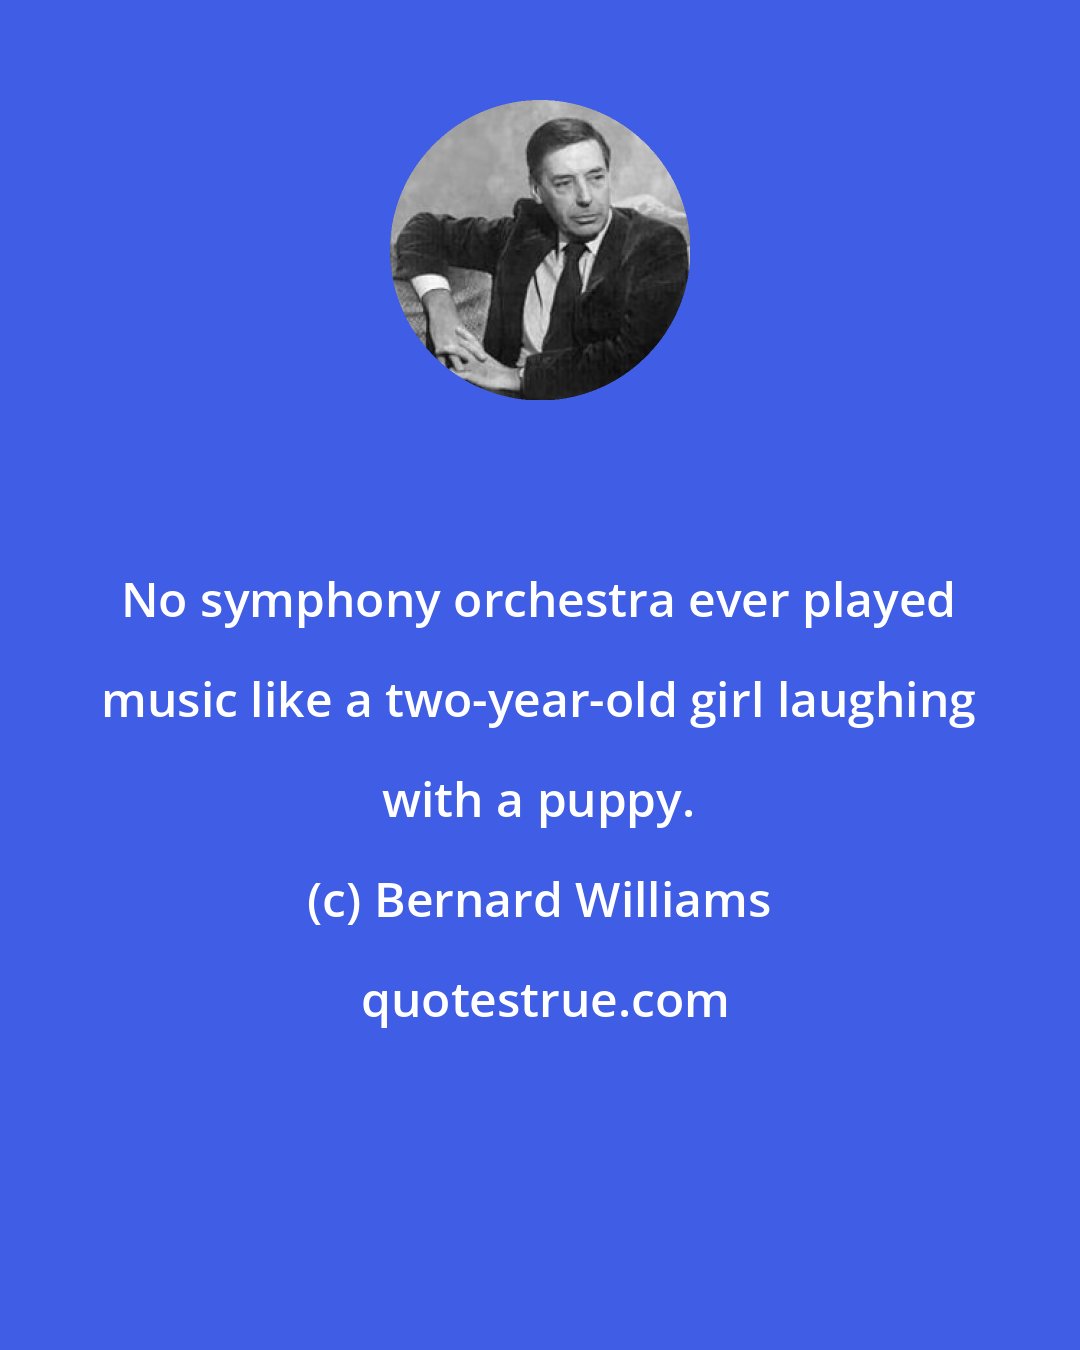 Bernard Williams: No symphony orchestra ever played music like a two-year-old girl laughing with a puppy.